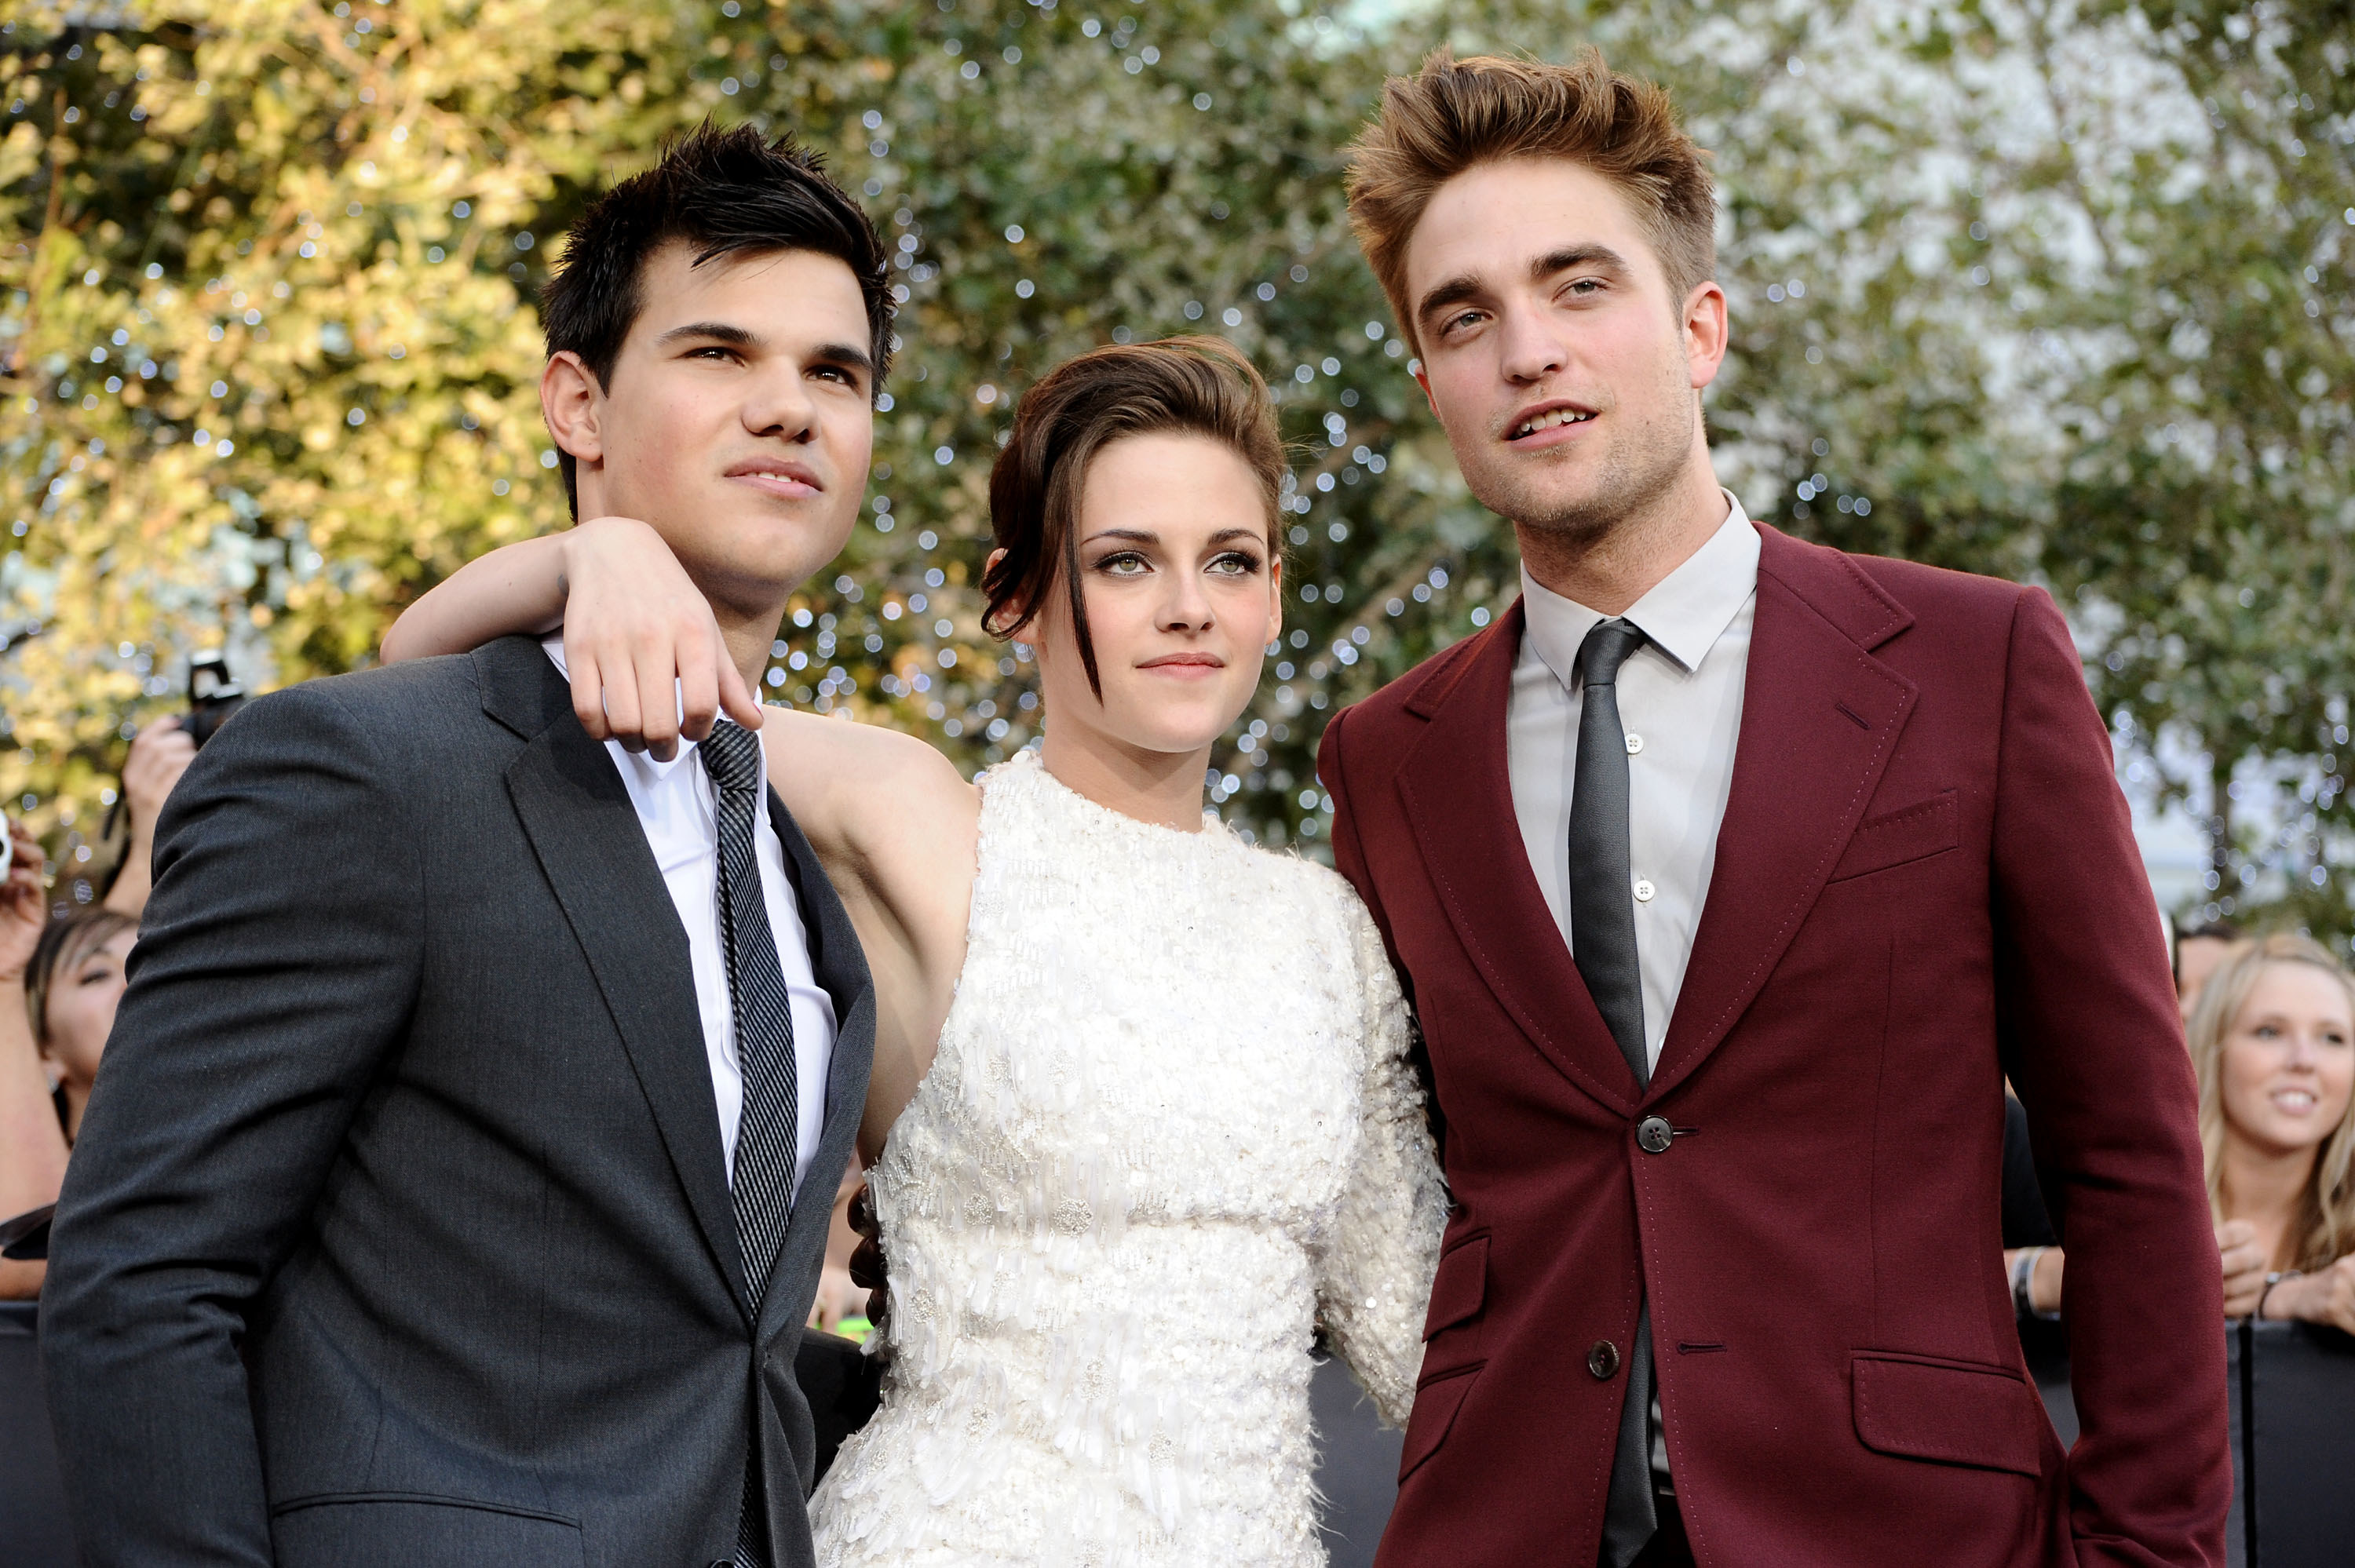 Kristen with Taylor Lautner and Rob Pattinson at a Twilight series film premiere